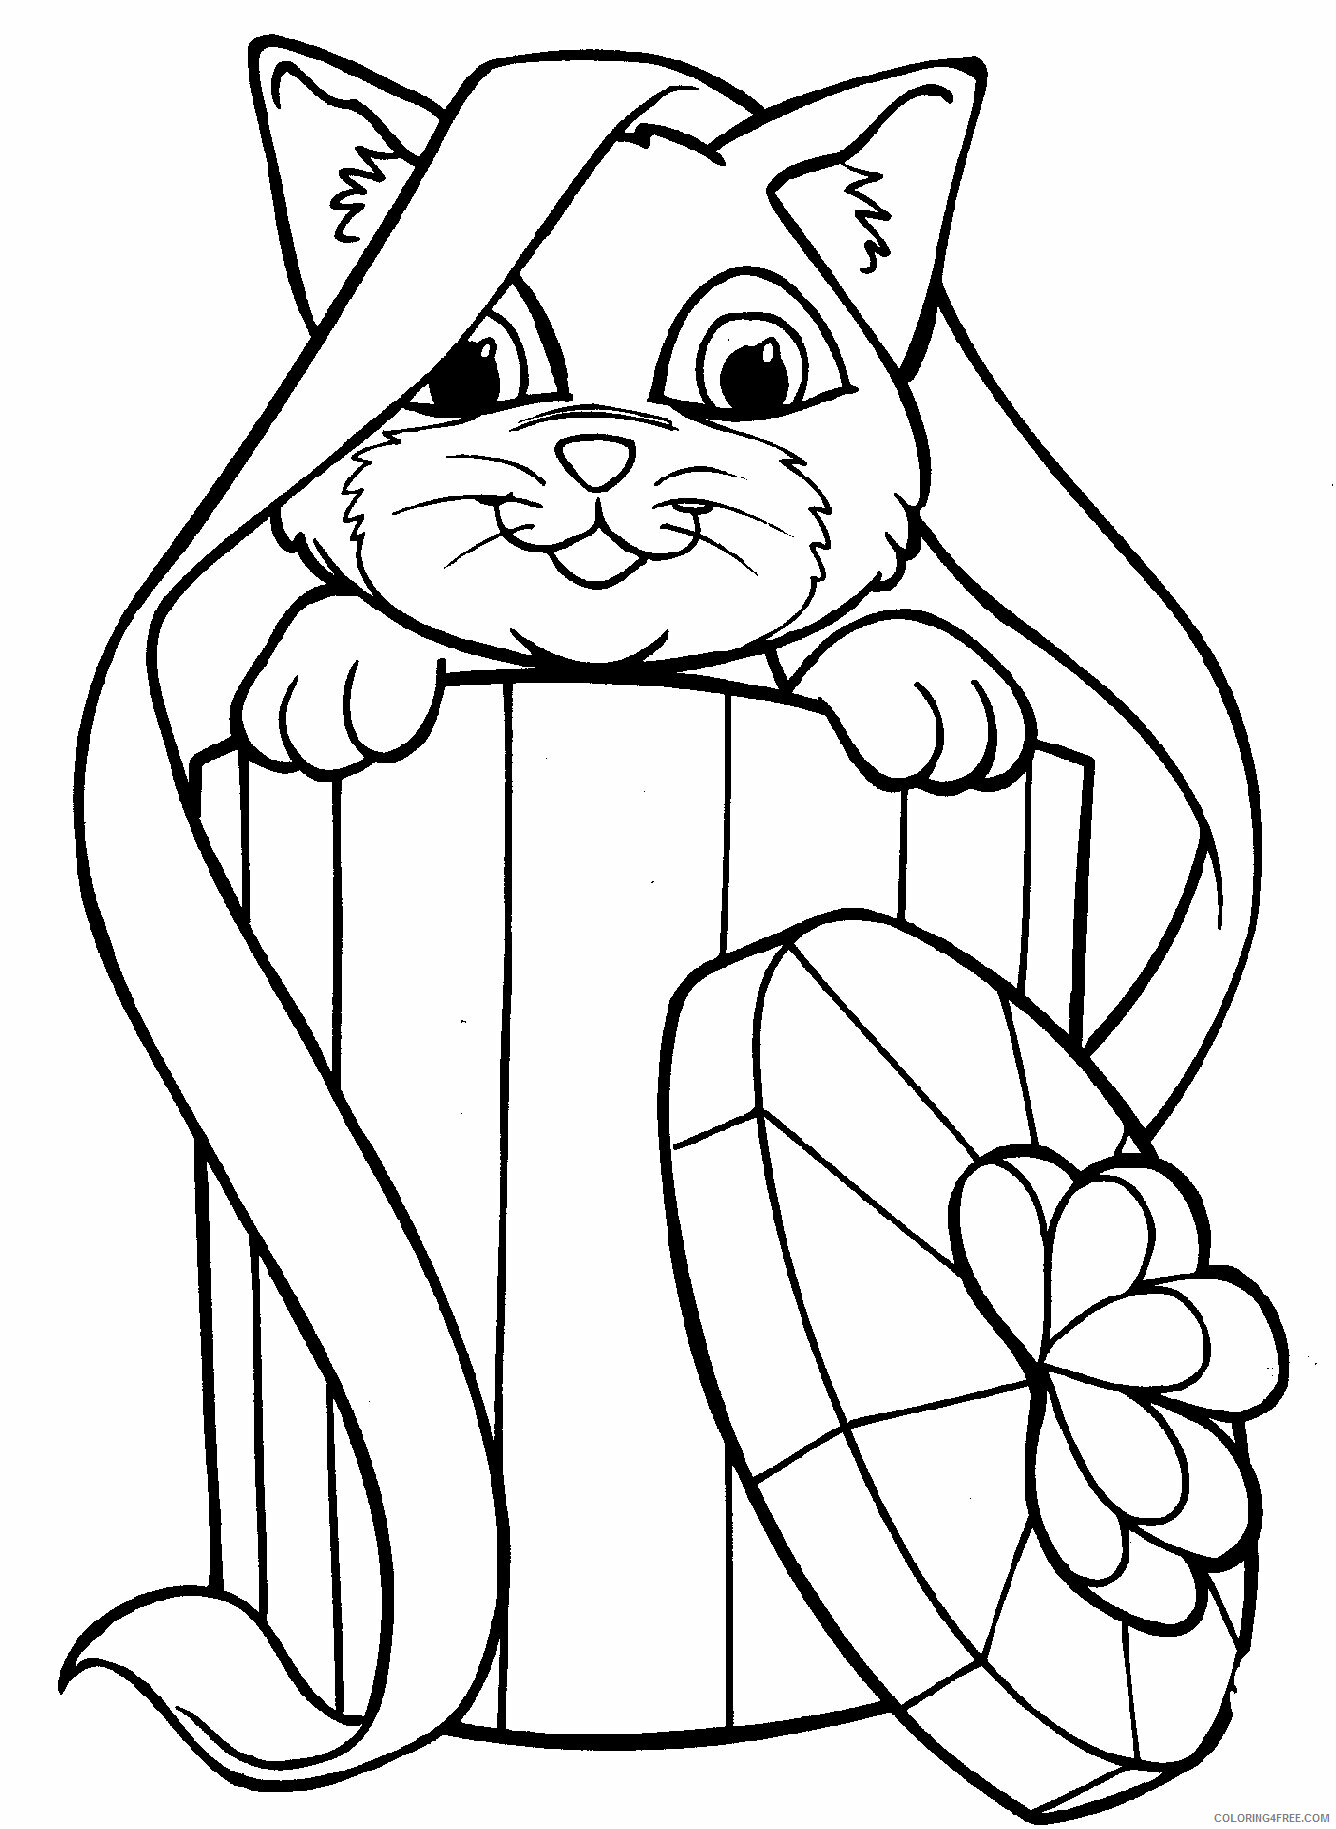 Kitten Coloring Sheets Animal Coloring Pages Printable 2021 2668 Coloring4free